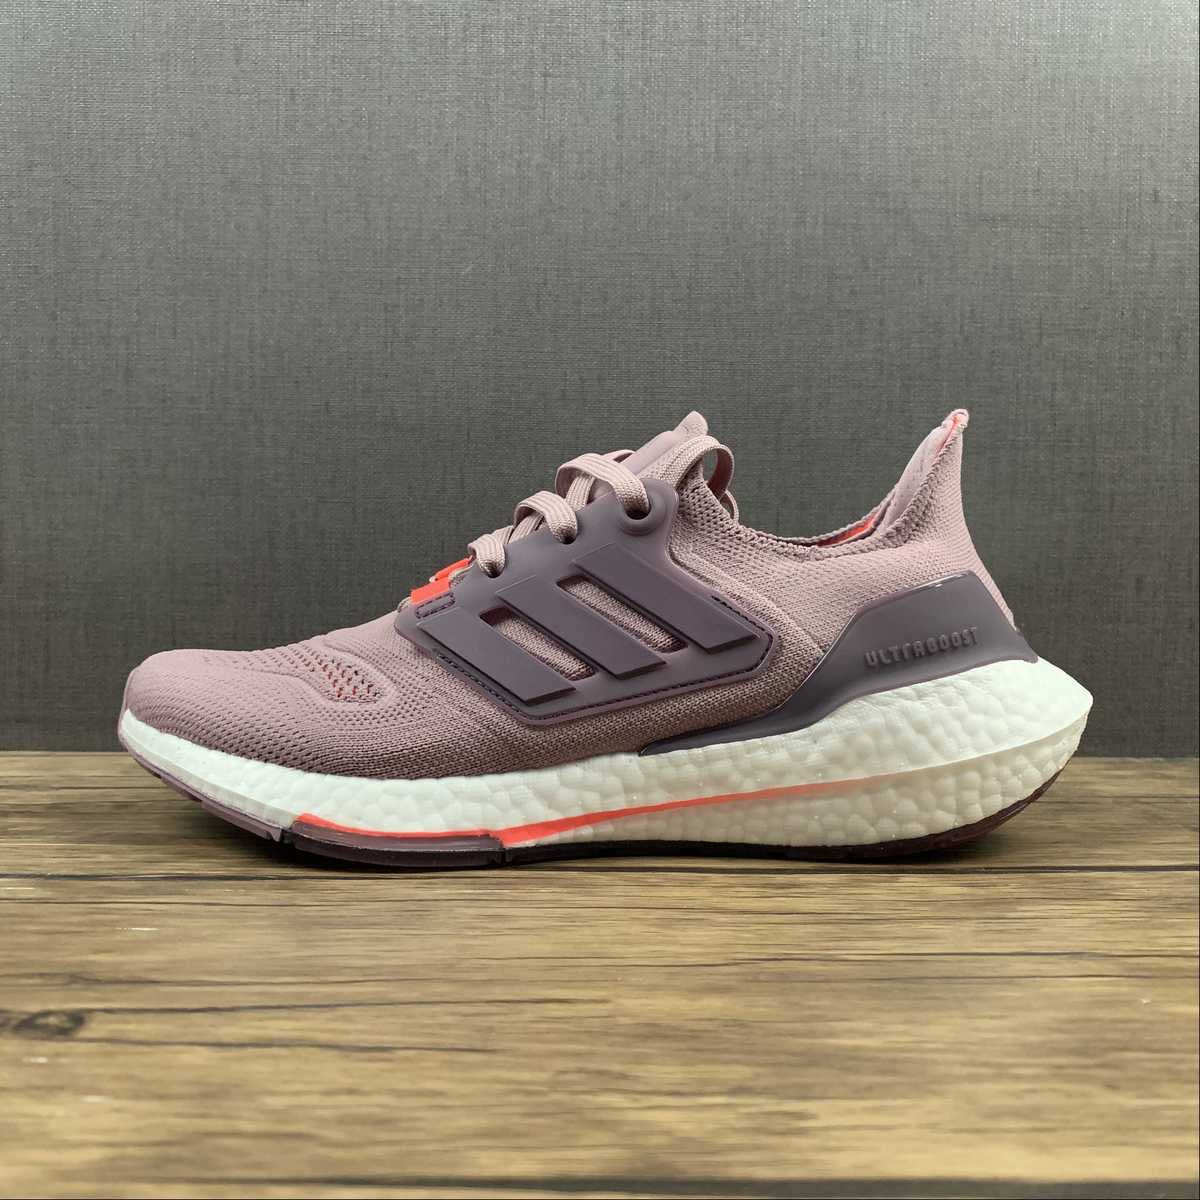 Chaussures Adidas Ultraboost violettes